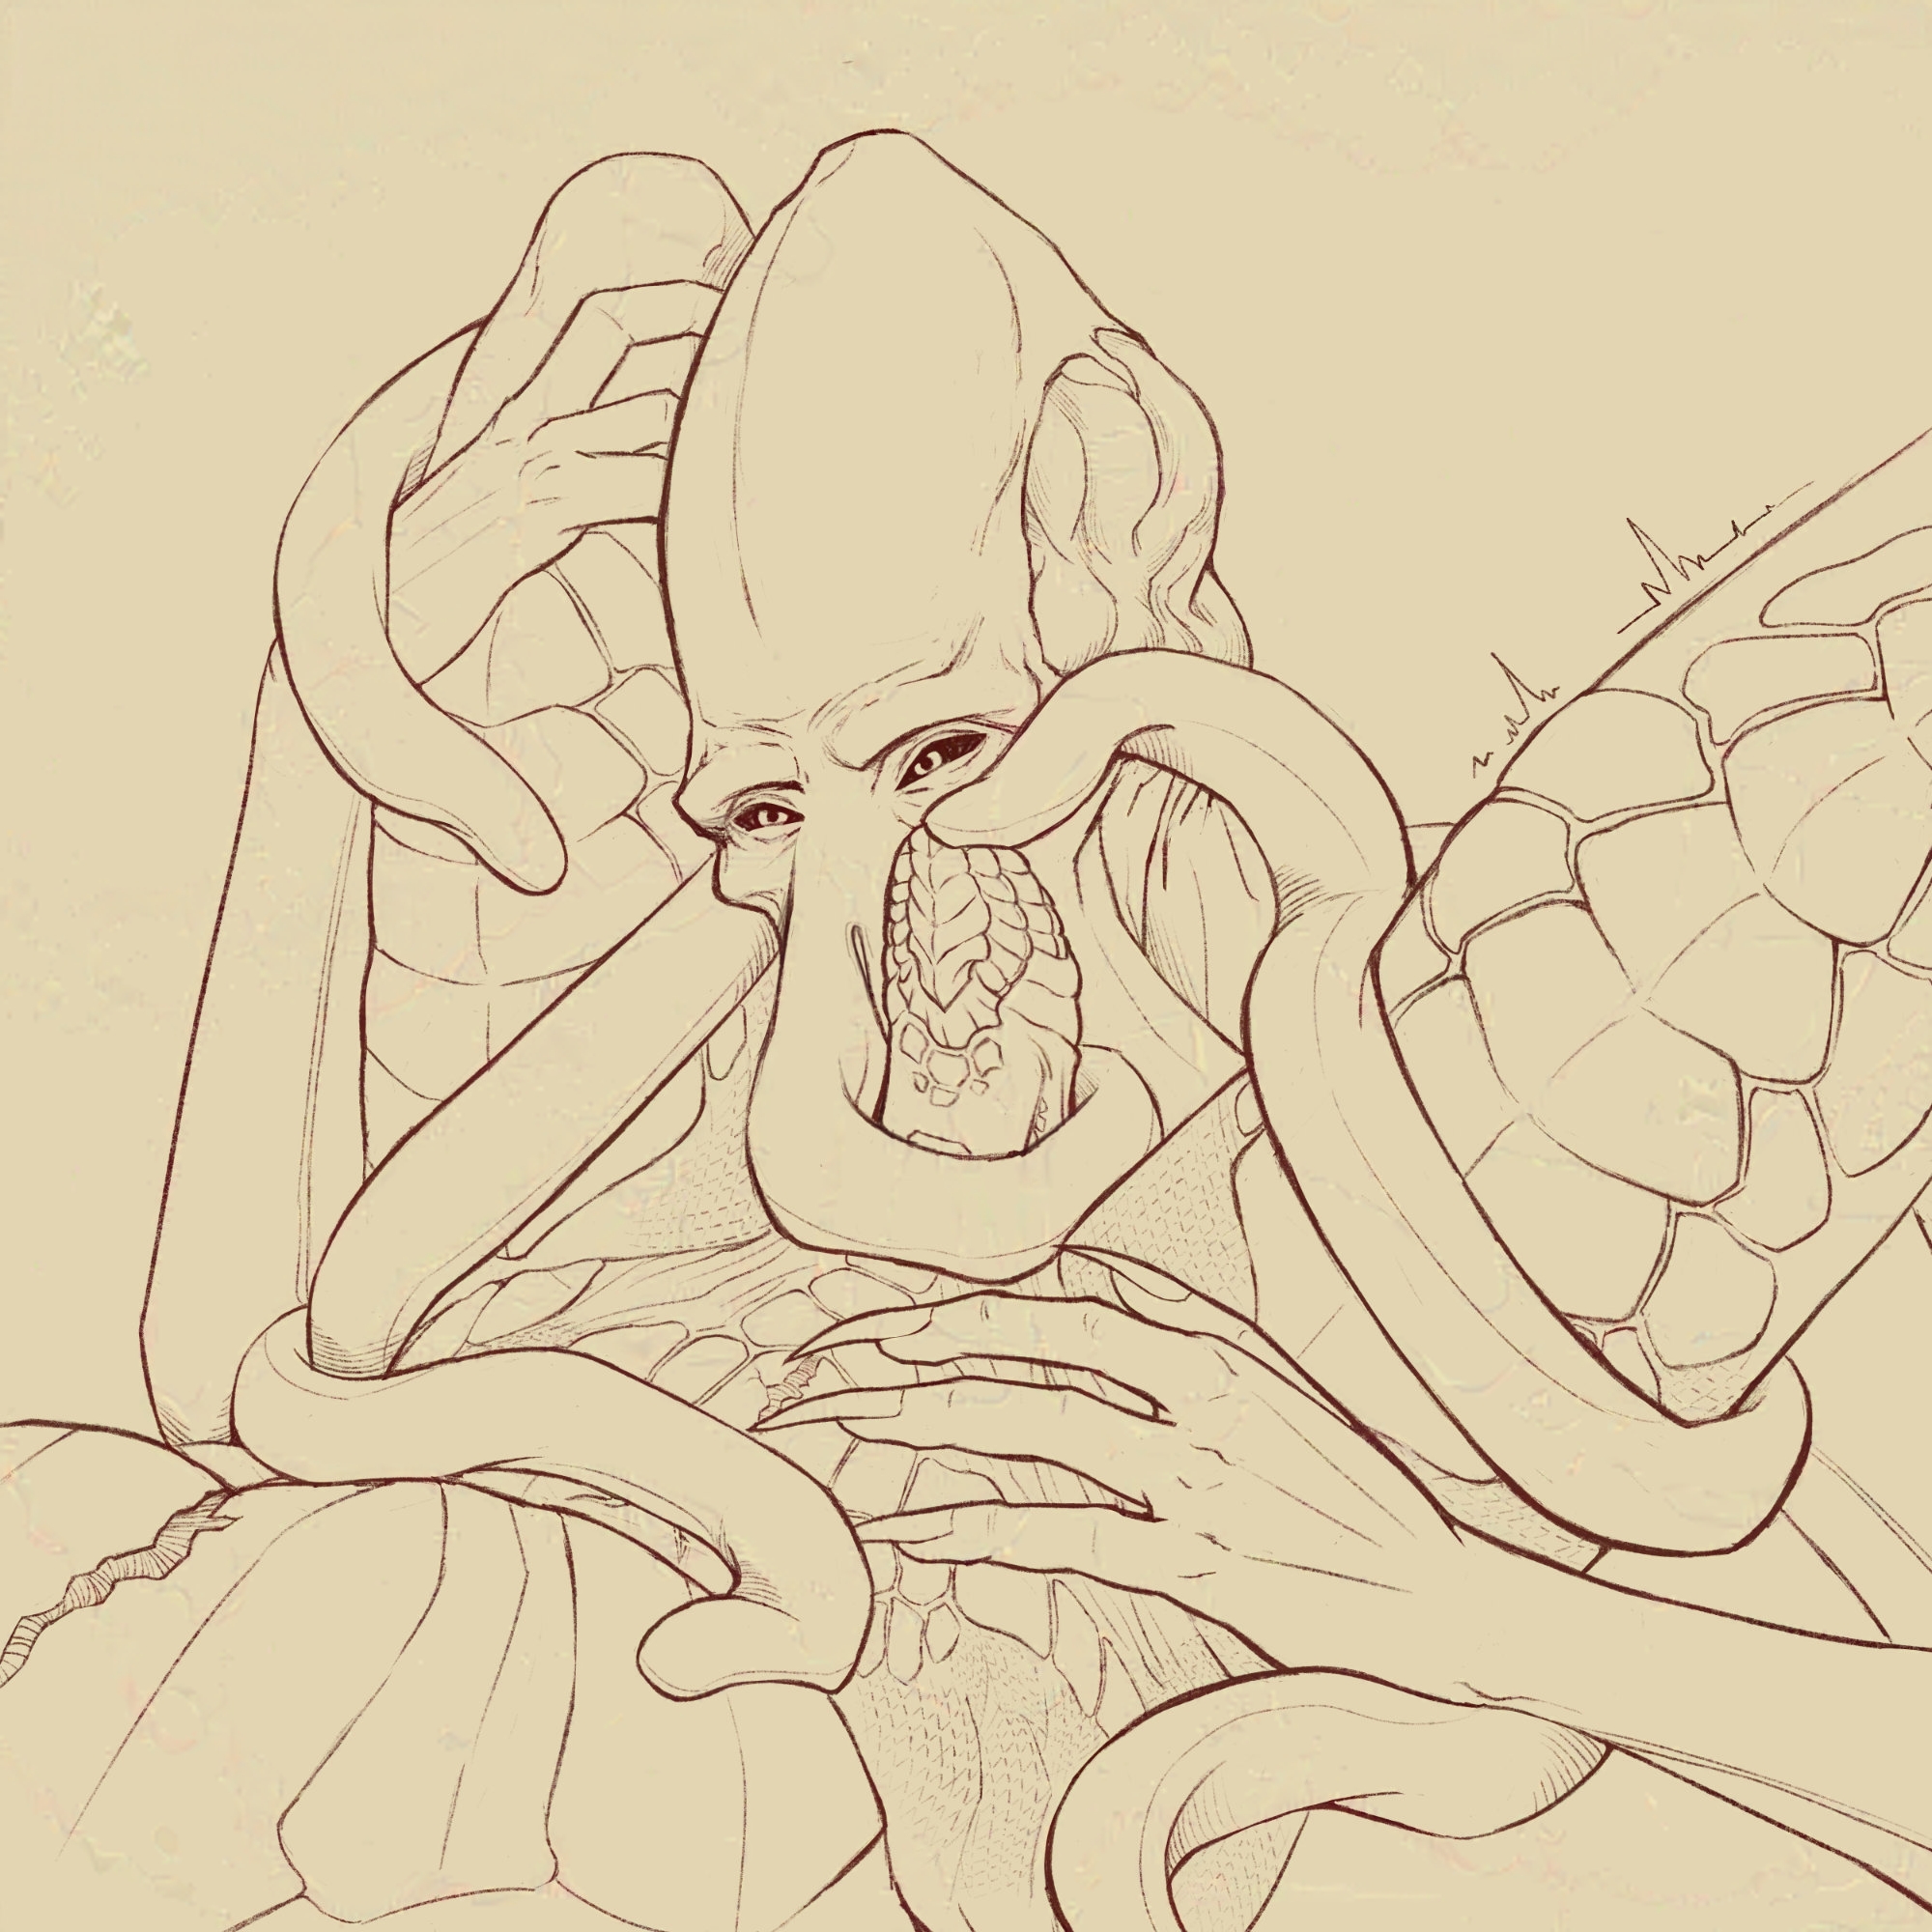 The Emperor has its tentacles coiled around Daamric's legs and cock, and they're both nude. A tentacle touches the tip teasingly with a mischievous look.